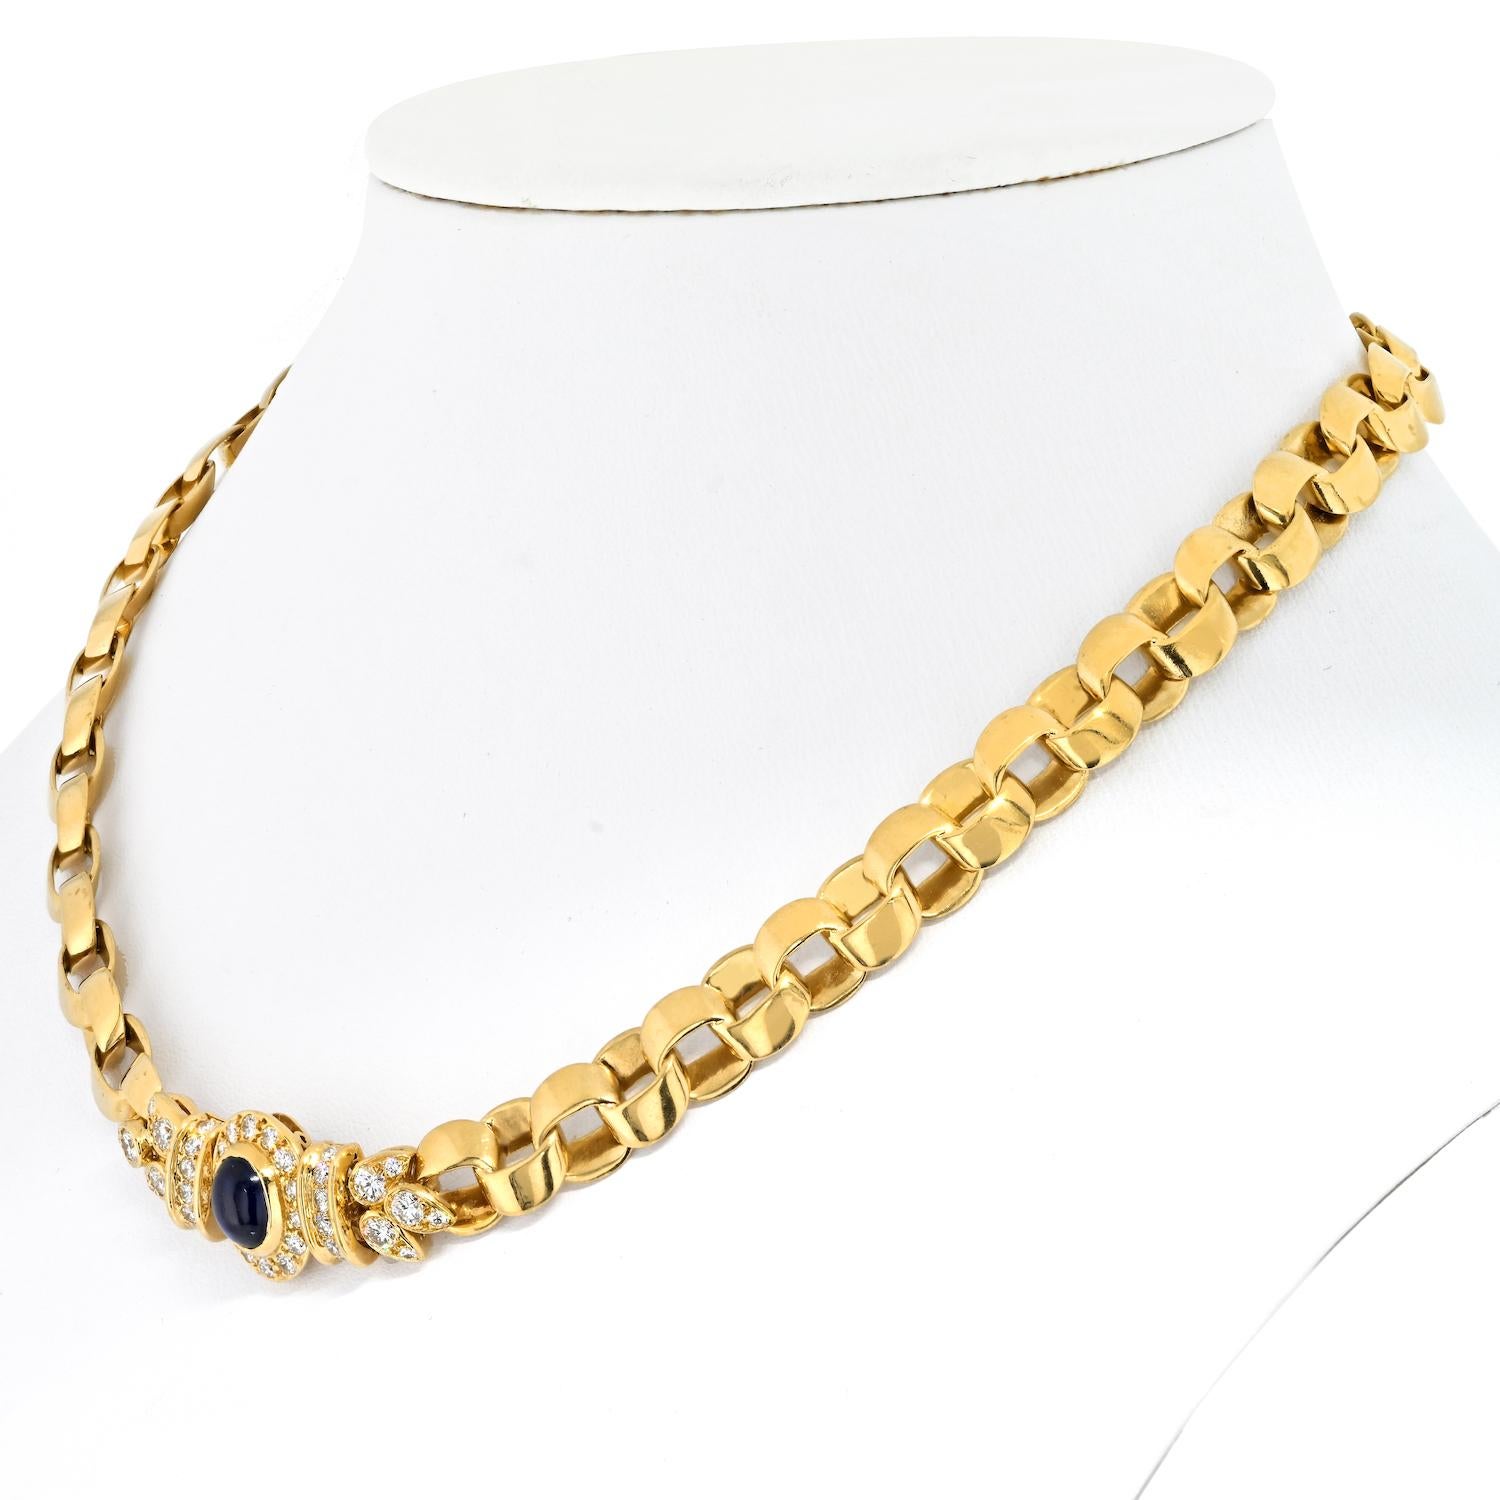 Modern Van Cleef & Arpels 18k Yellow Gold Diamond and Sapphire Curb Link Chain Necklace